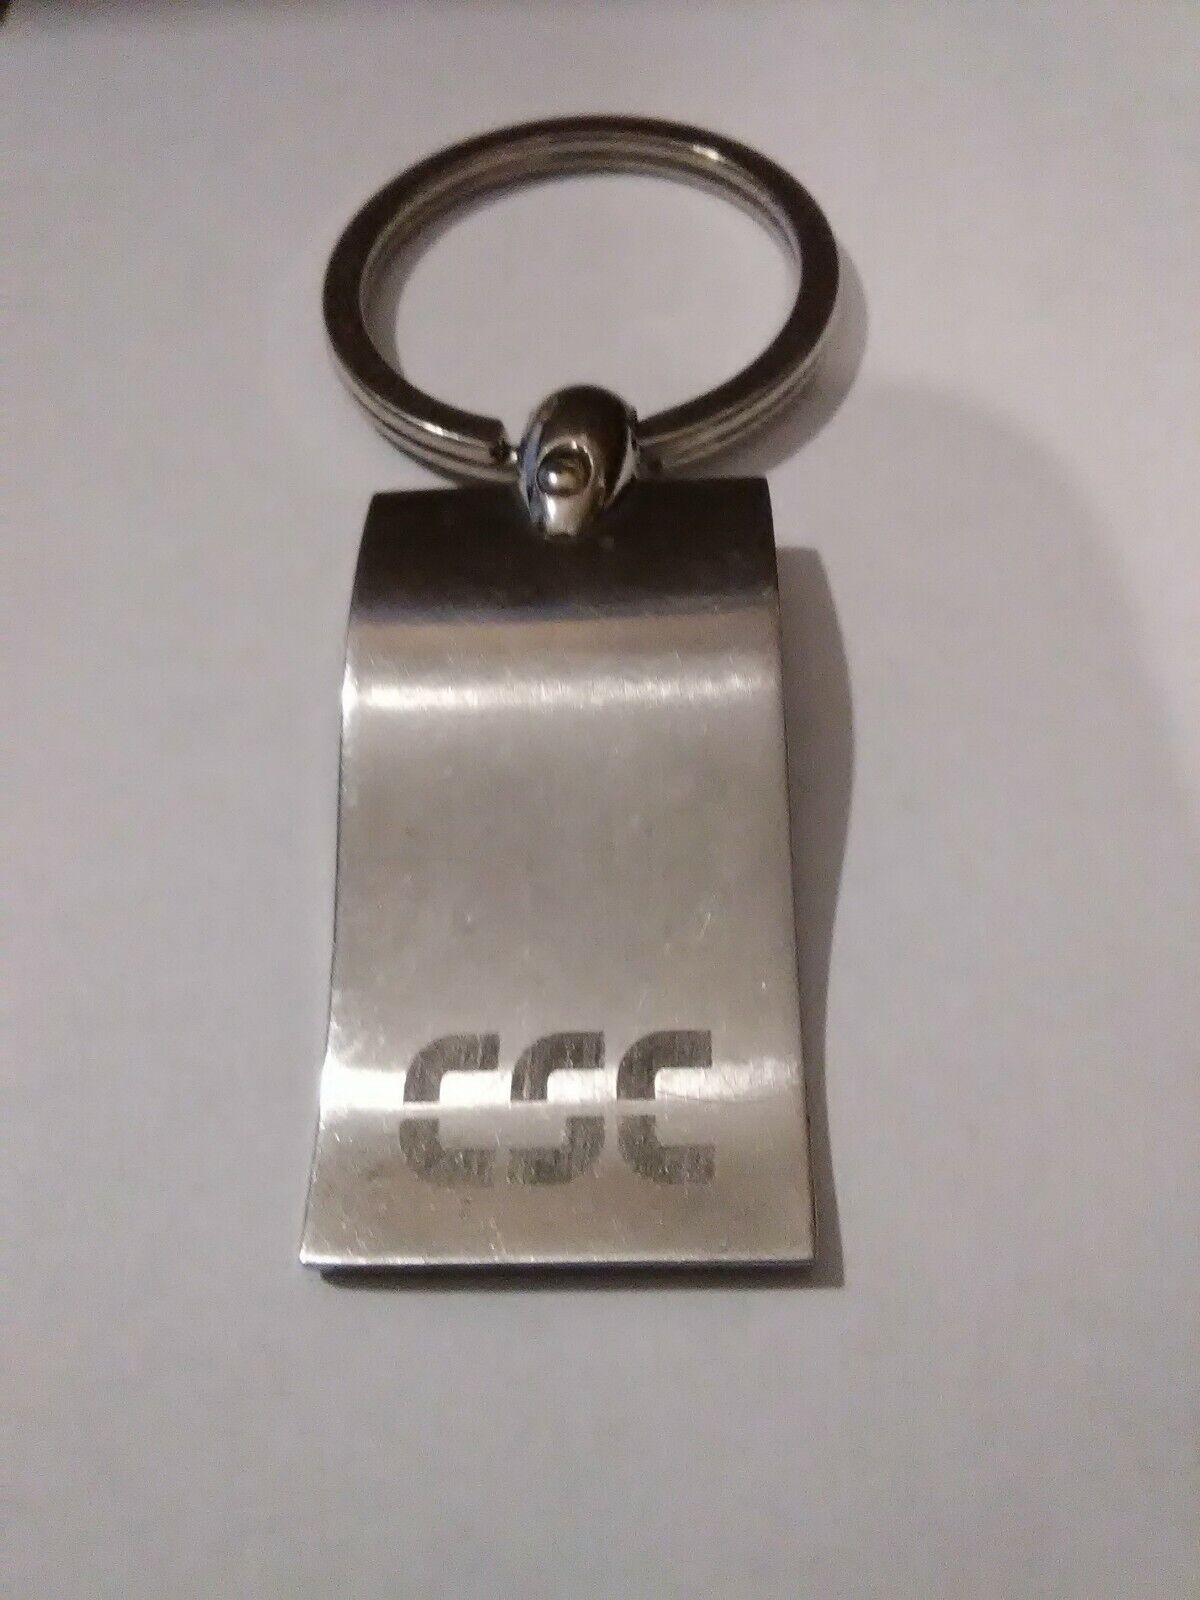 CSC LOGO KEY CHAIN GREAT FOR ANY VINTAGE COLLECTION